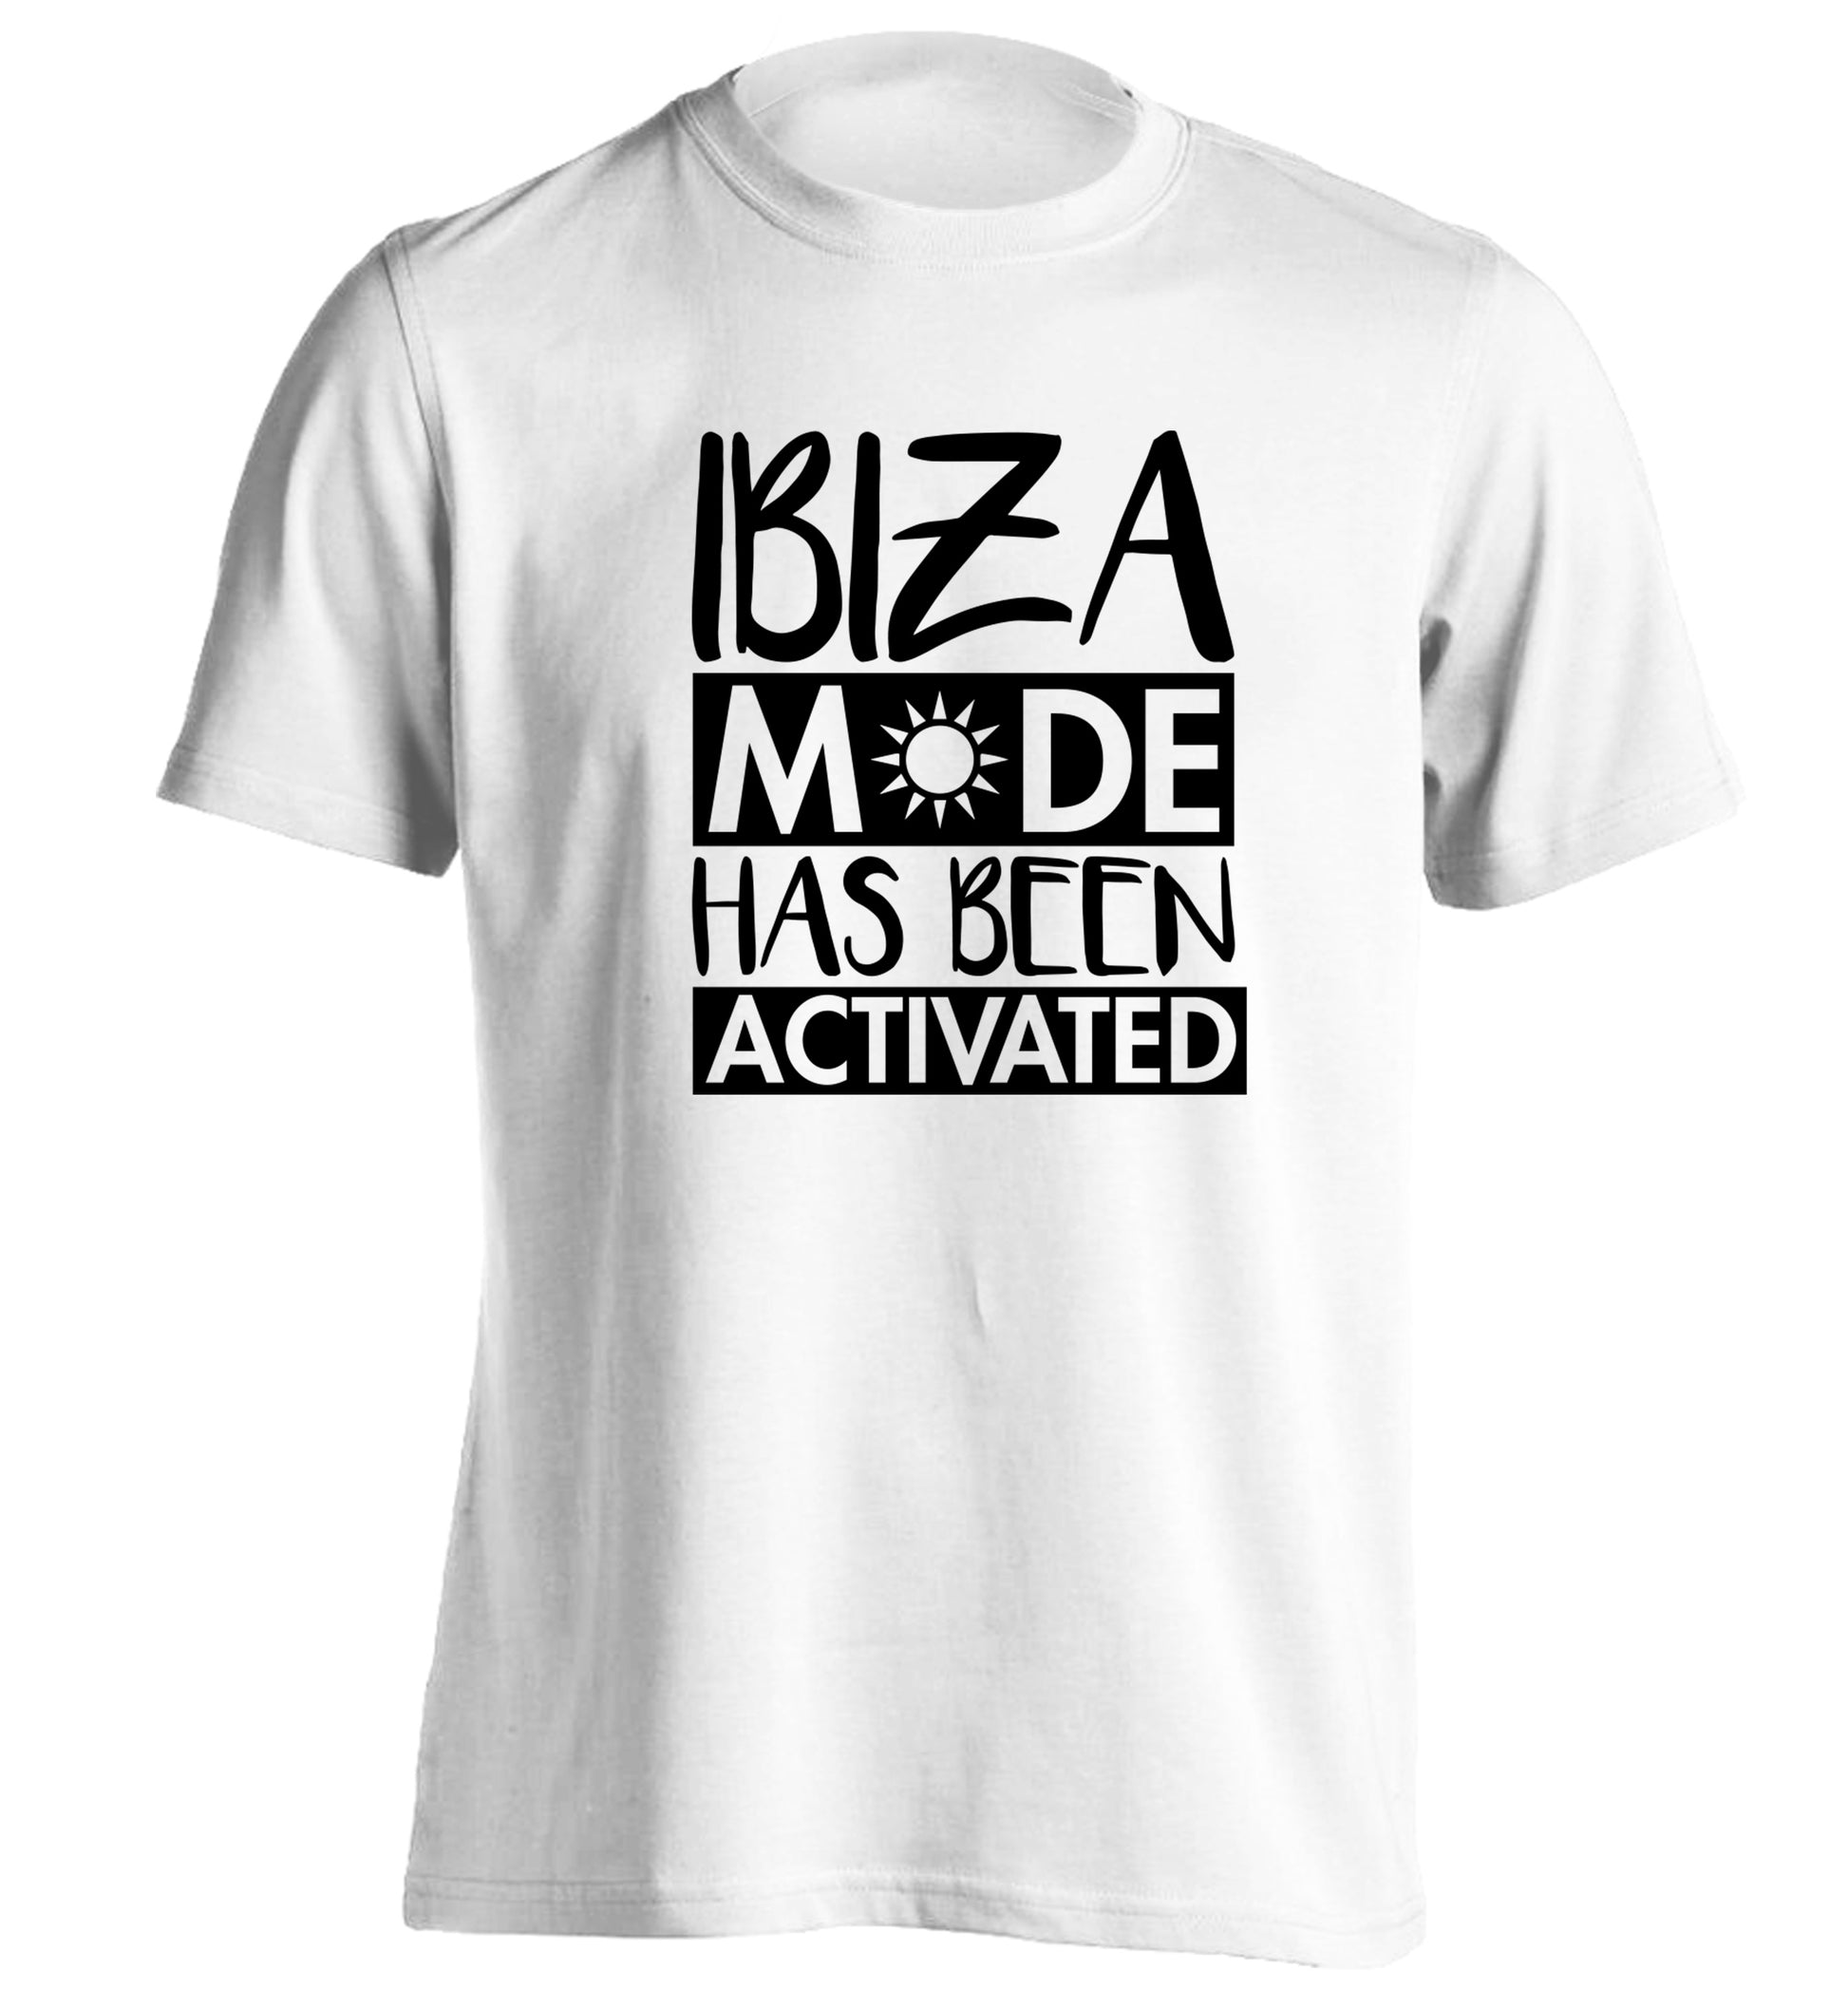 Ibiza mode has been activated adults unisex white Tshirt 2XL